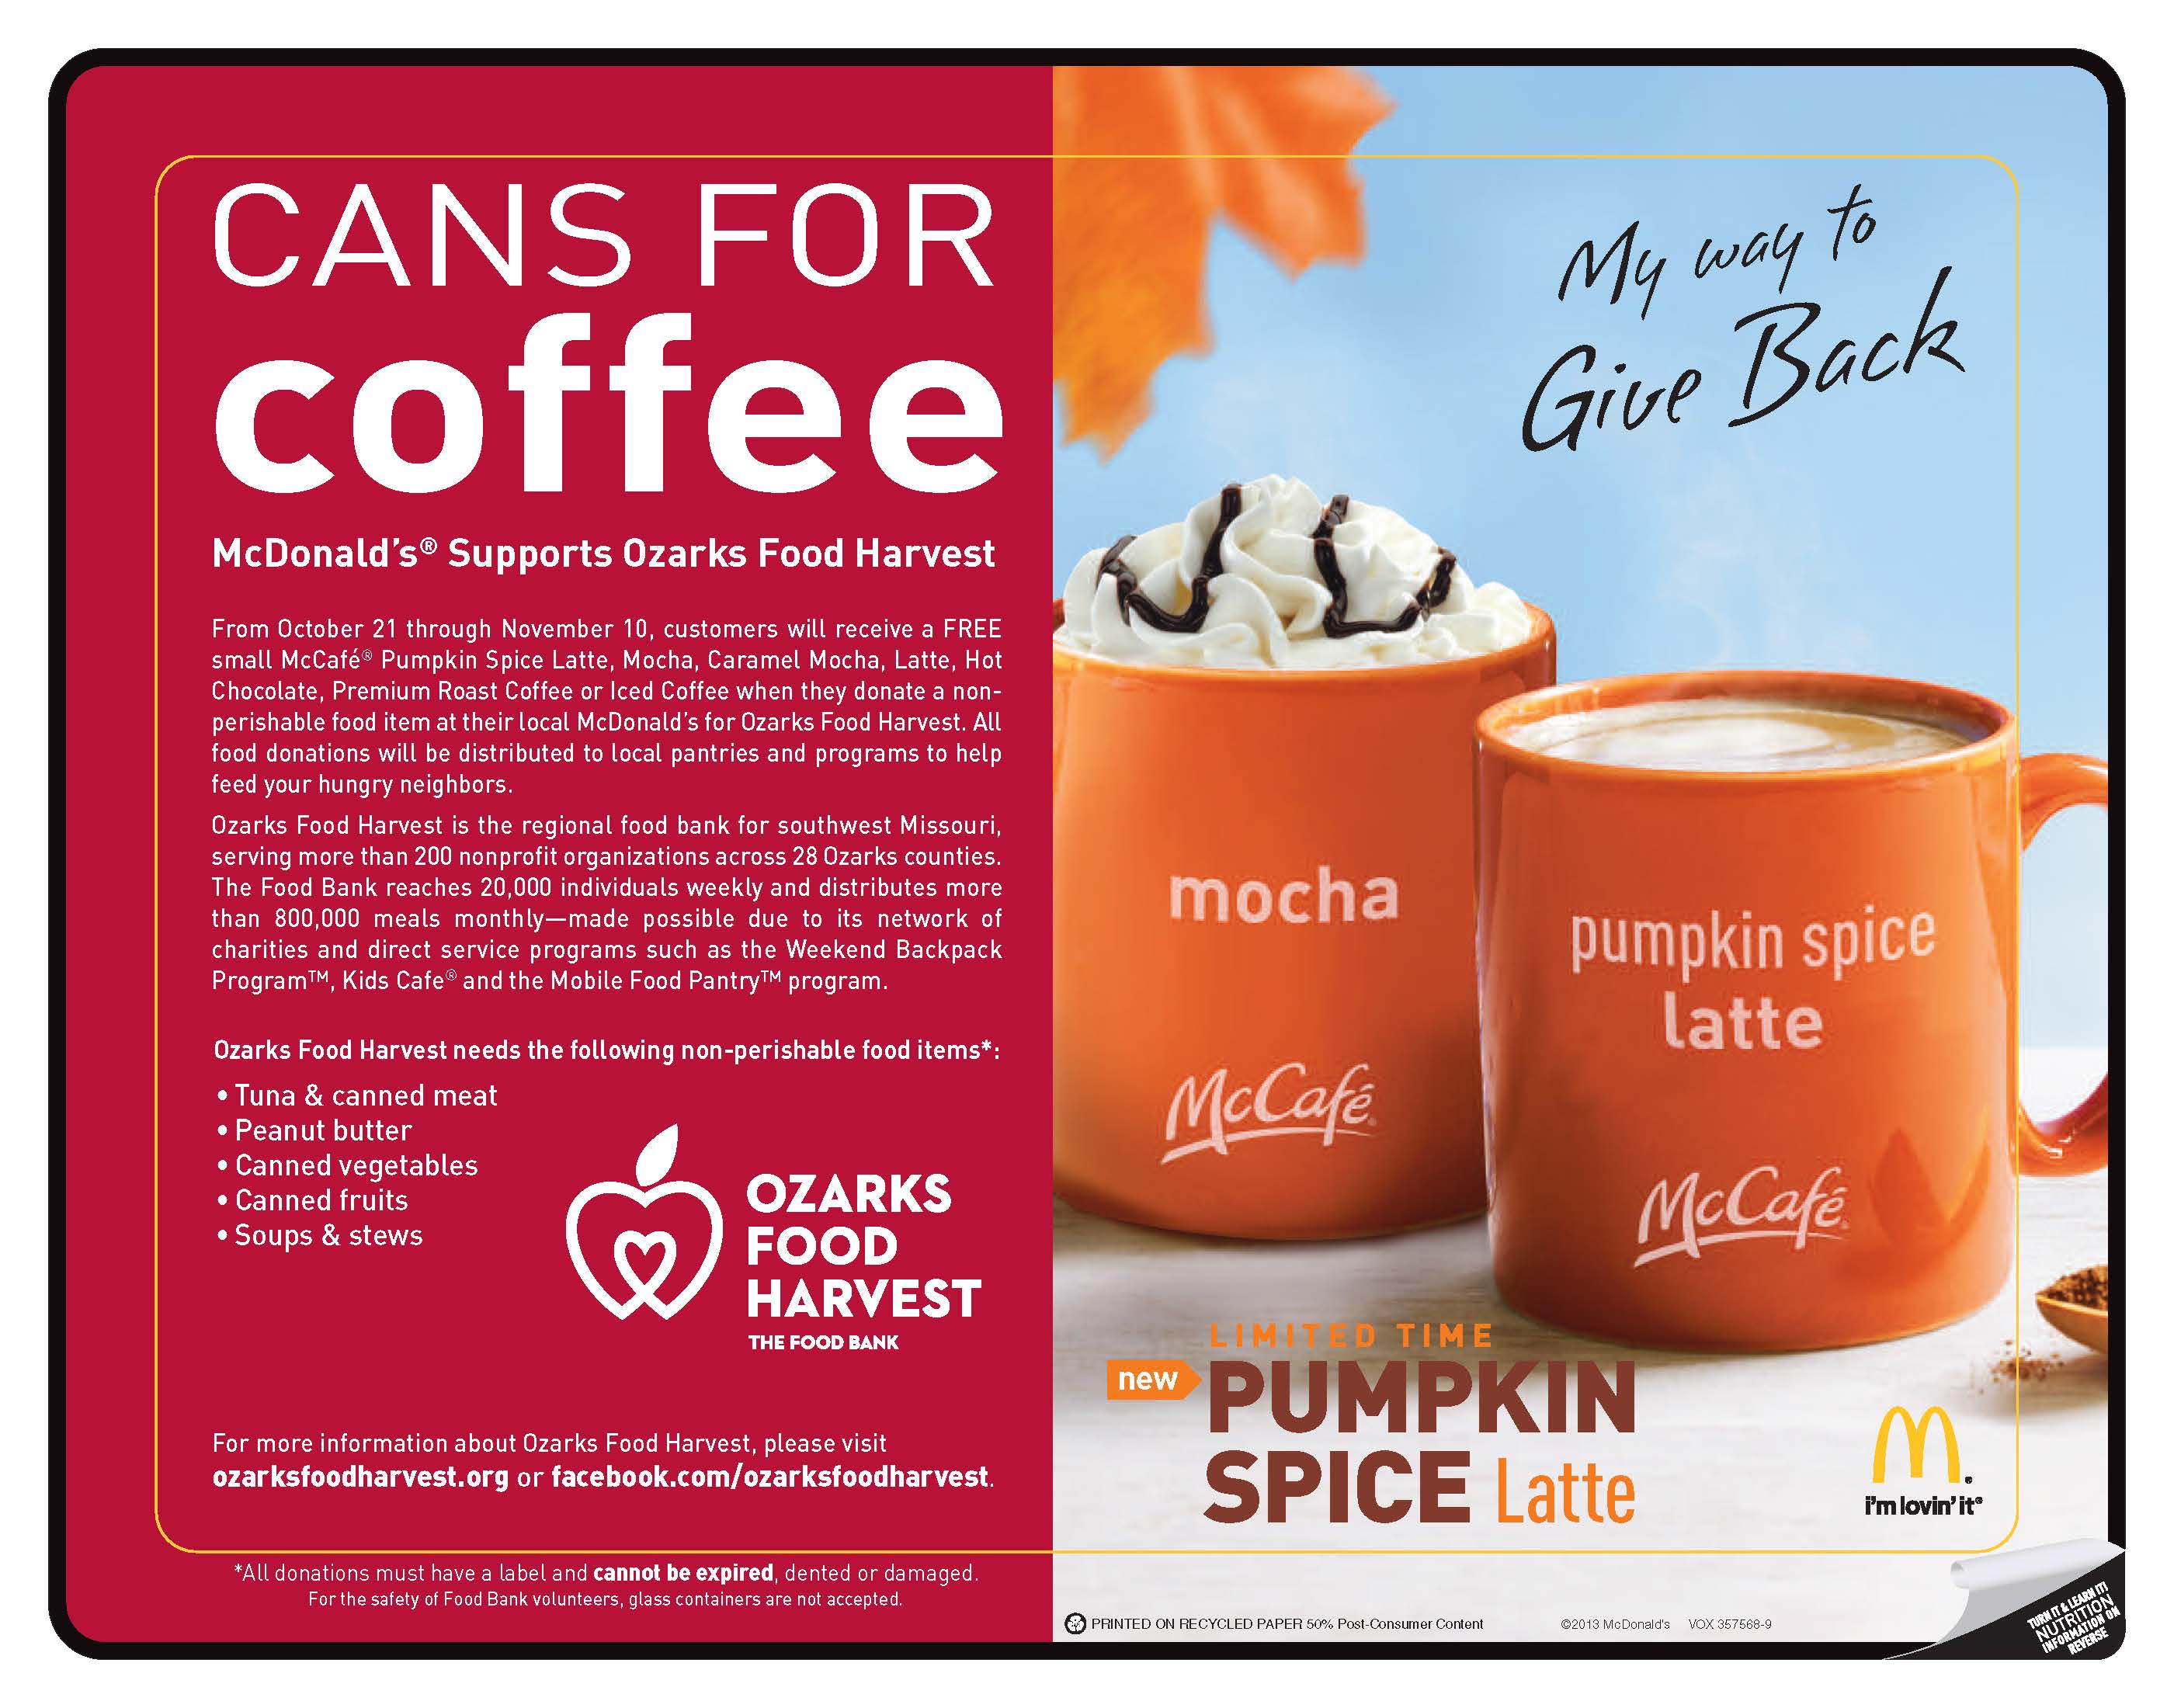 McDonald’s Cans for Coffee kicks off Oct. 21